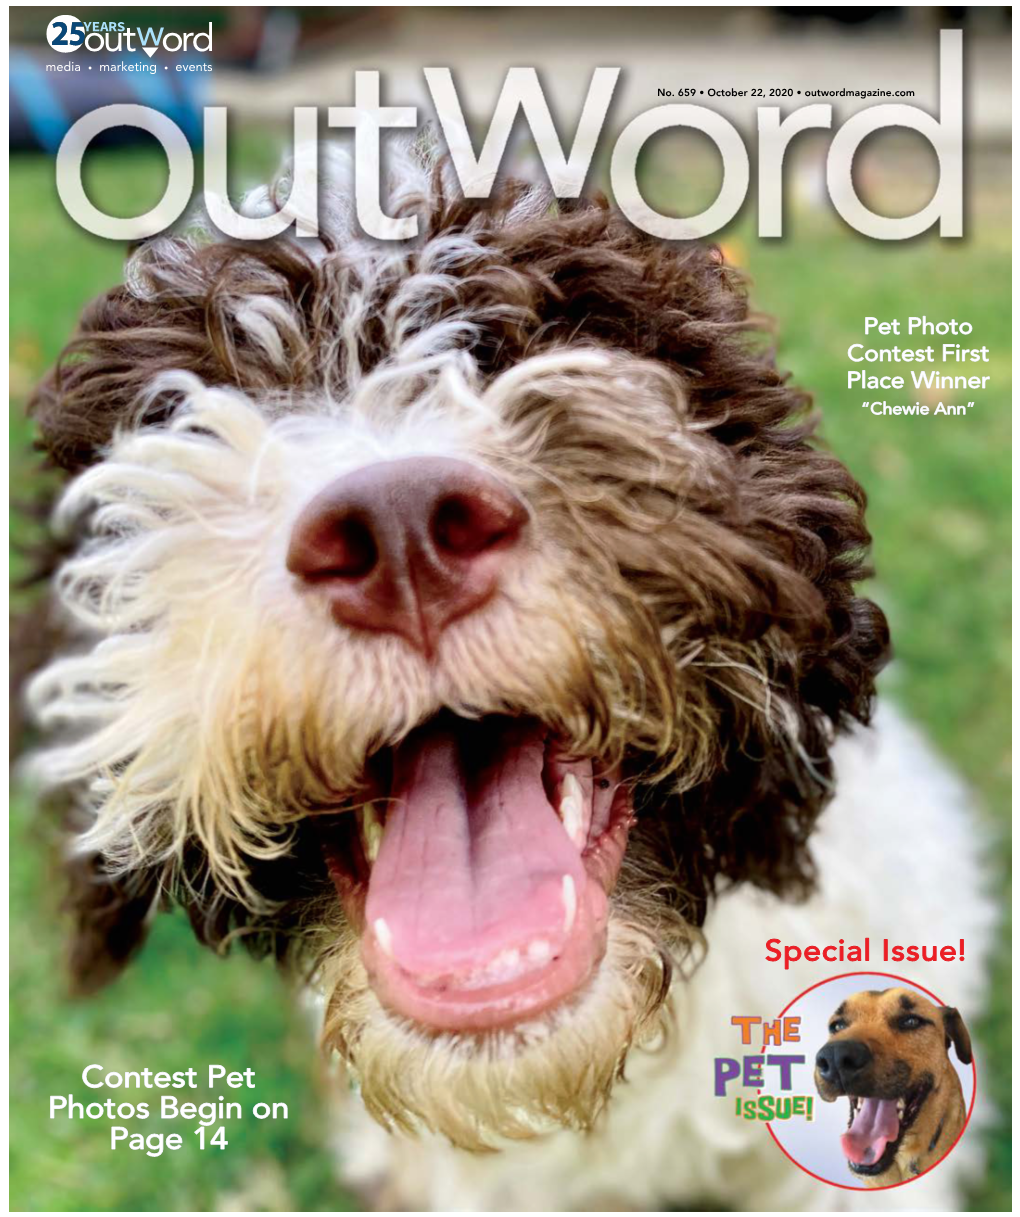 Contest Pet Photos Begin on Page 14